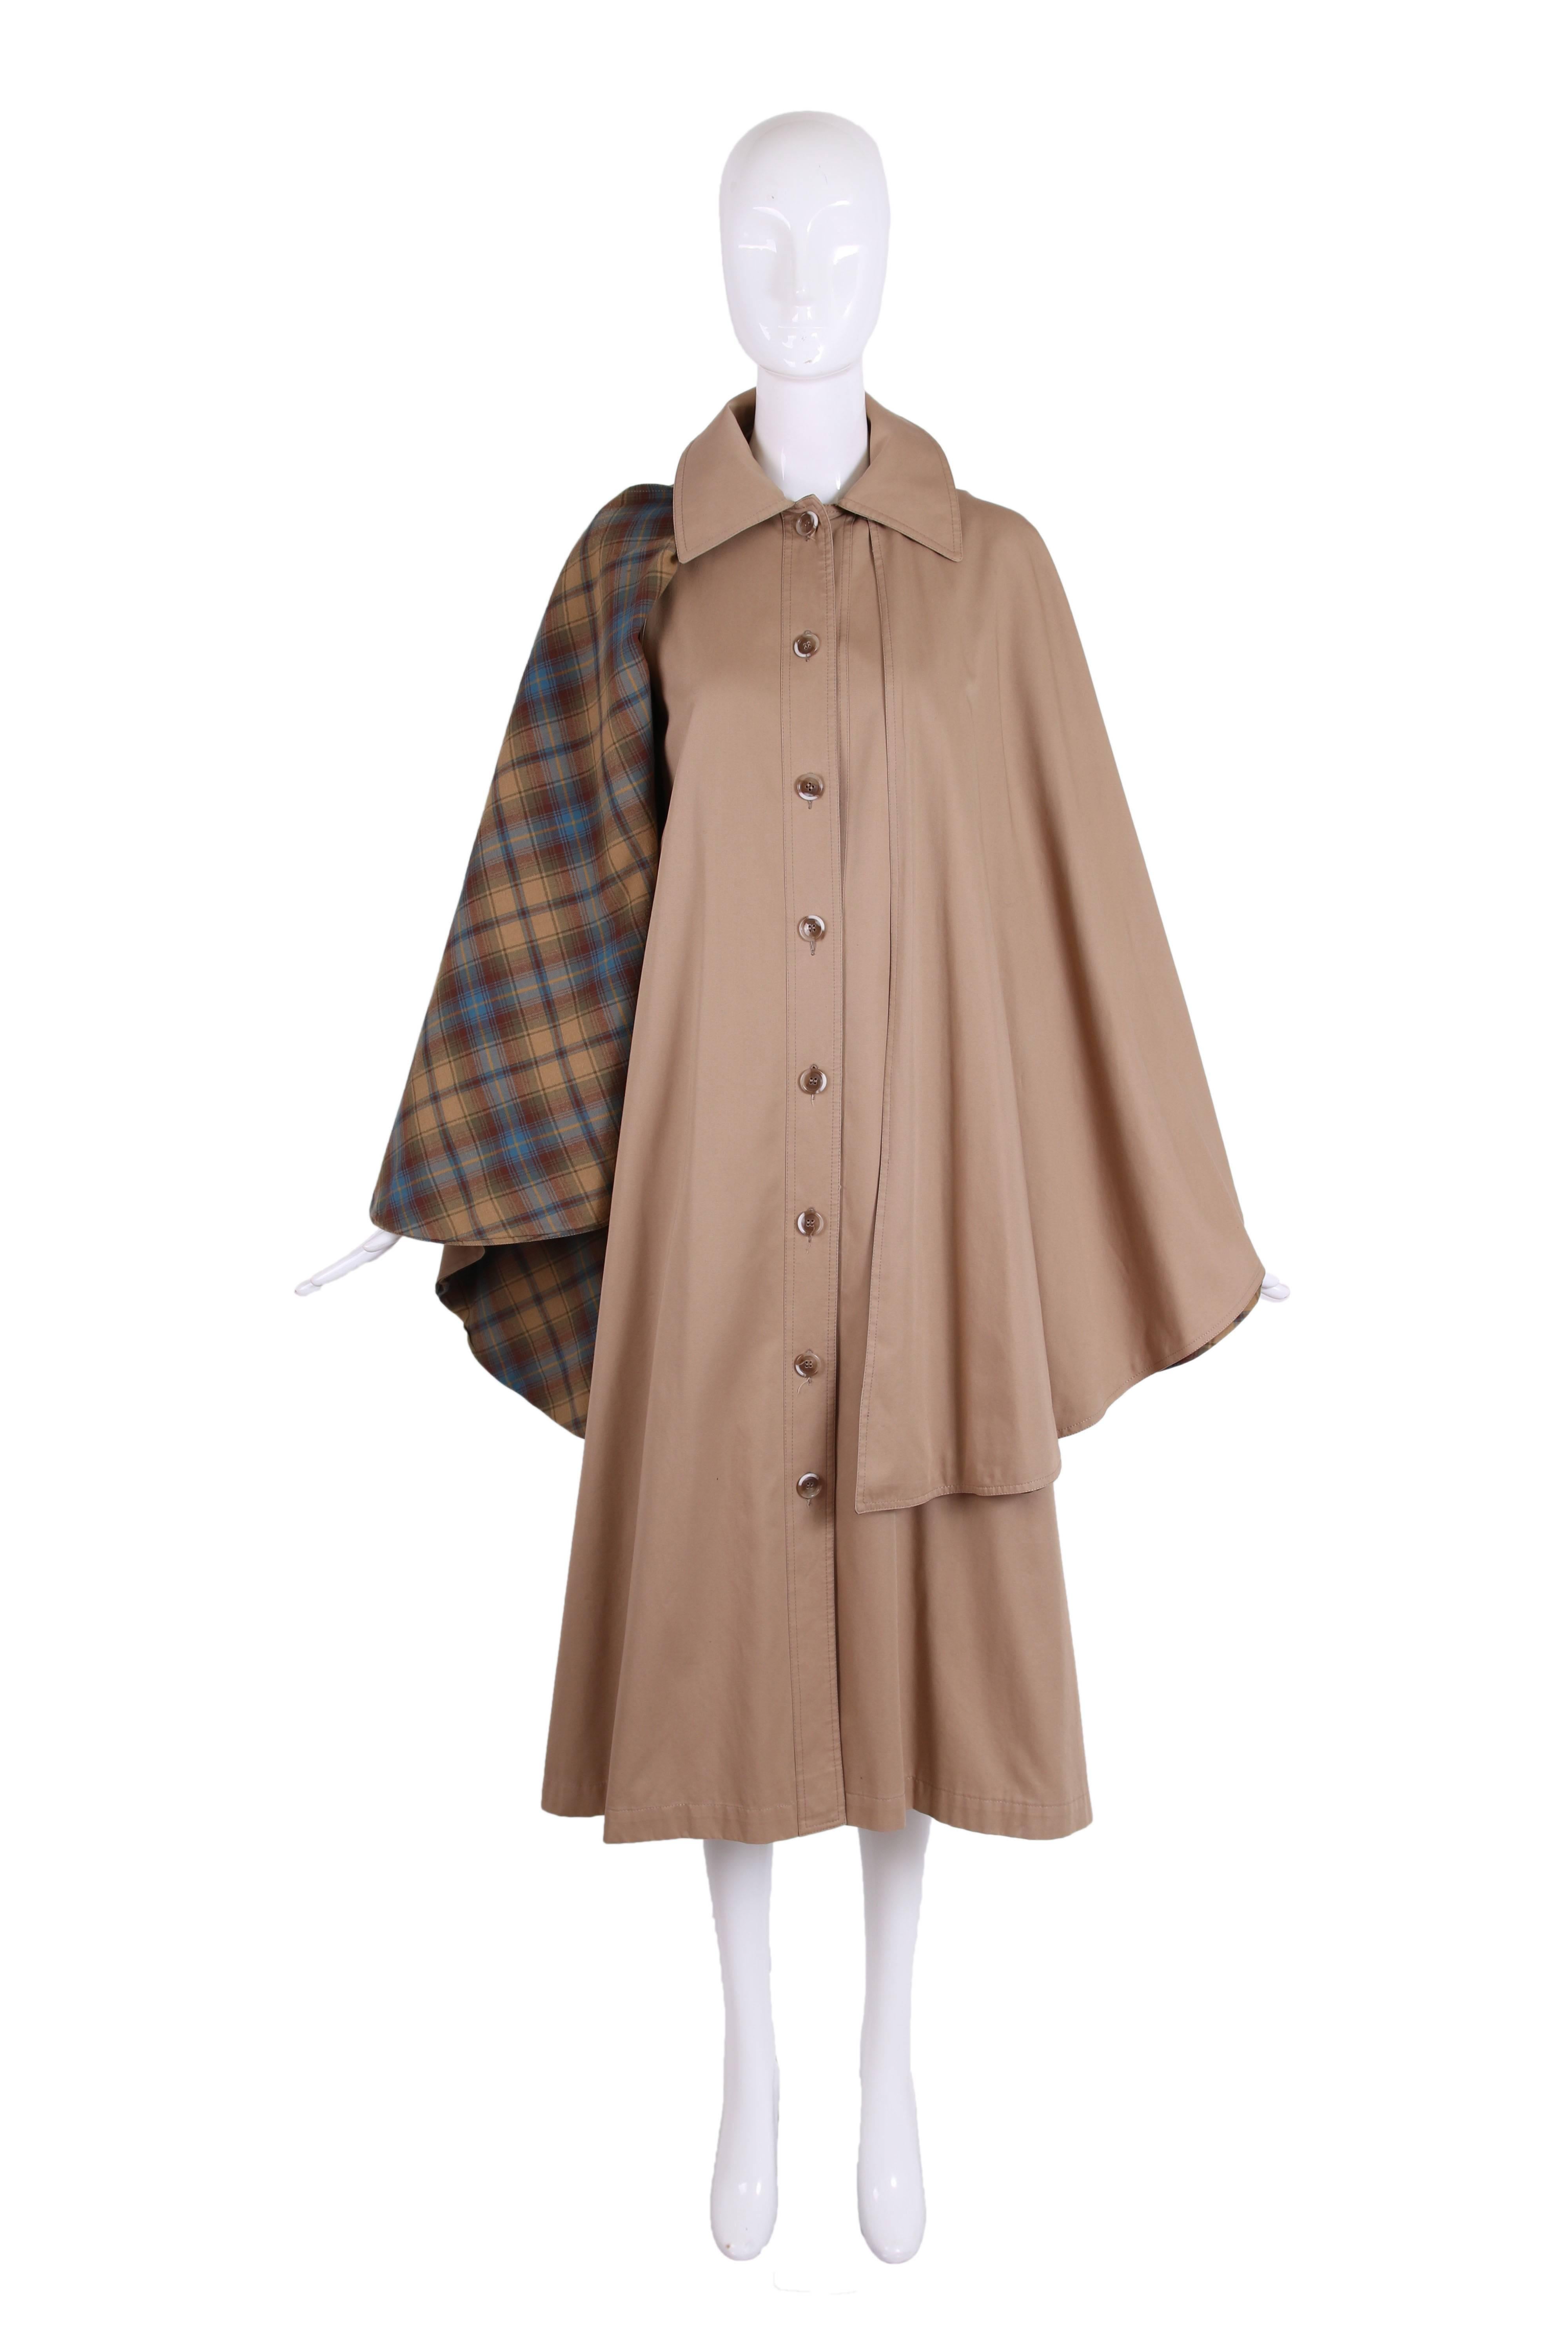 1970's Yves Saint Laurent khaki cotton cape coat with plaid interior, button closure down center front and side vents at hem. In excellent condition with a very small dark mark at front located next to side vent at hem. No size tag so please consult